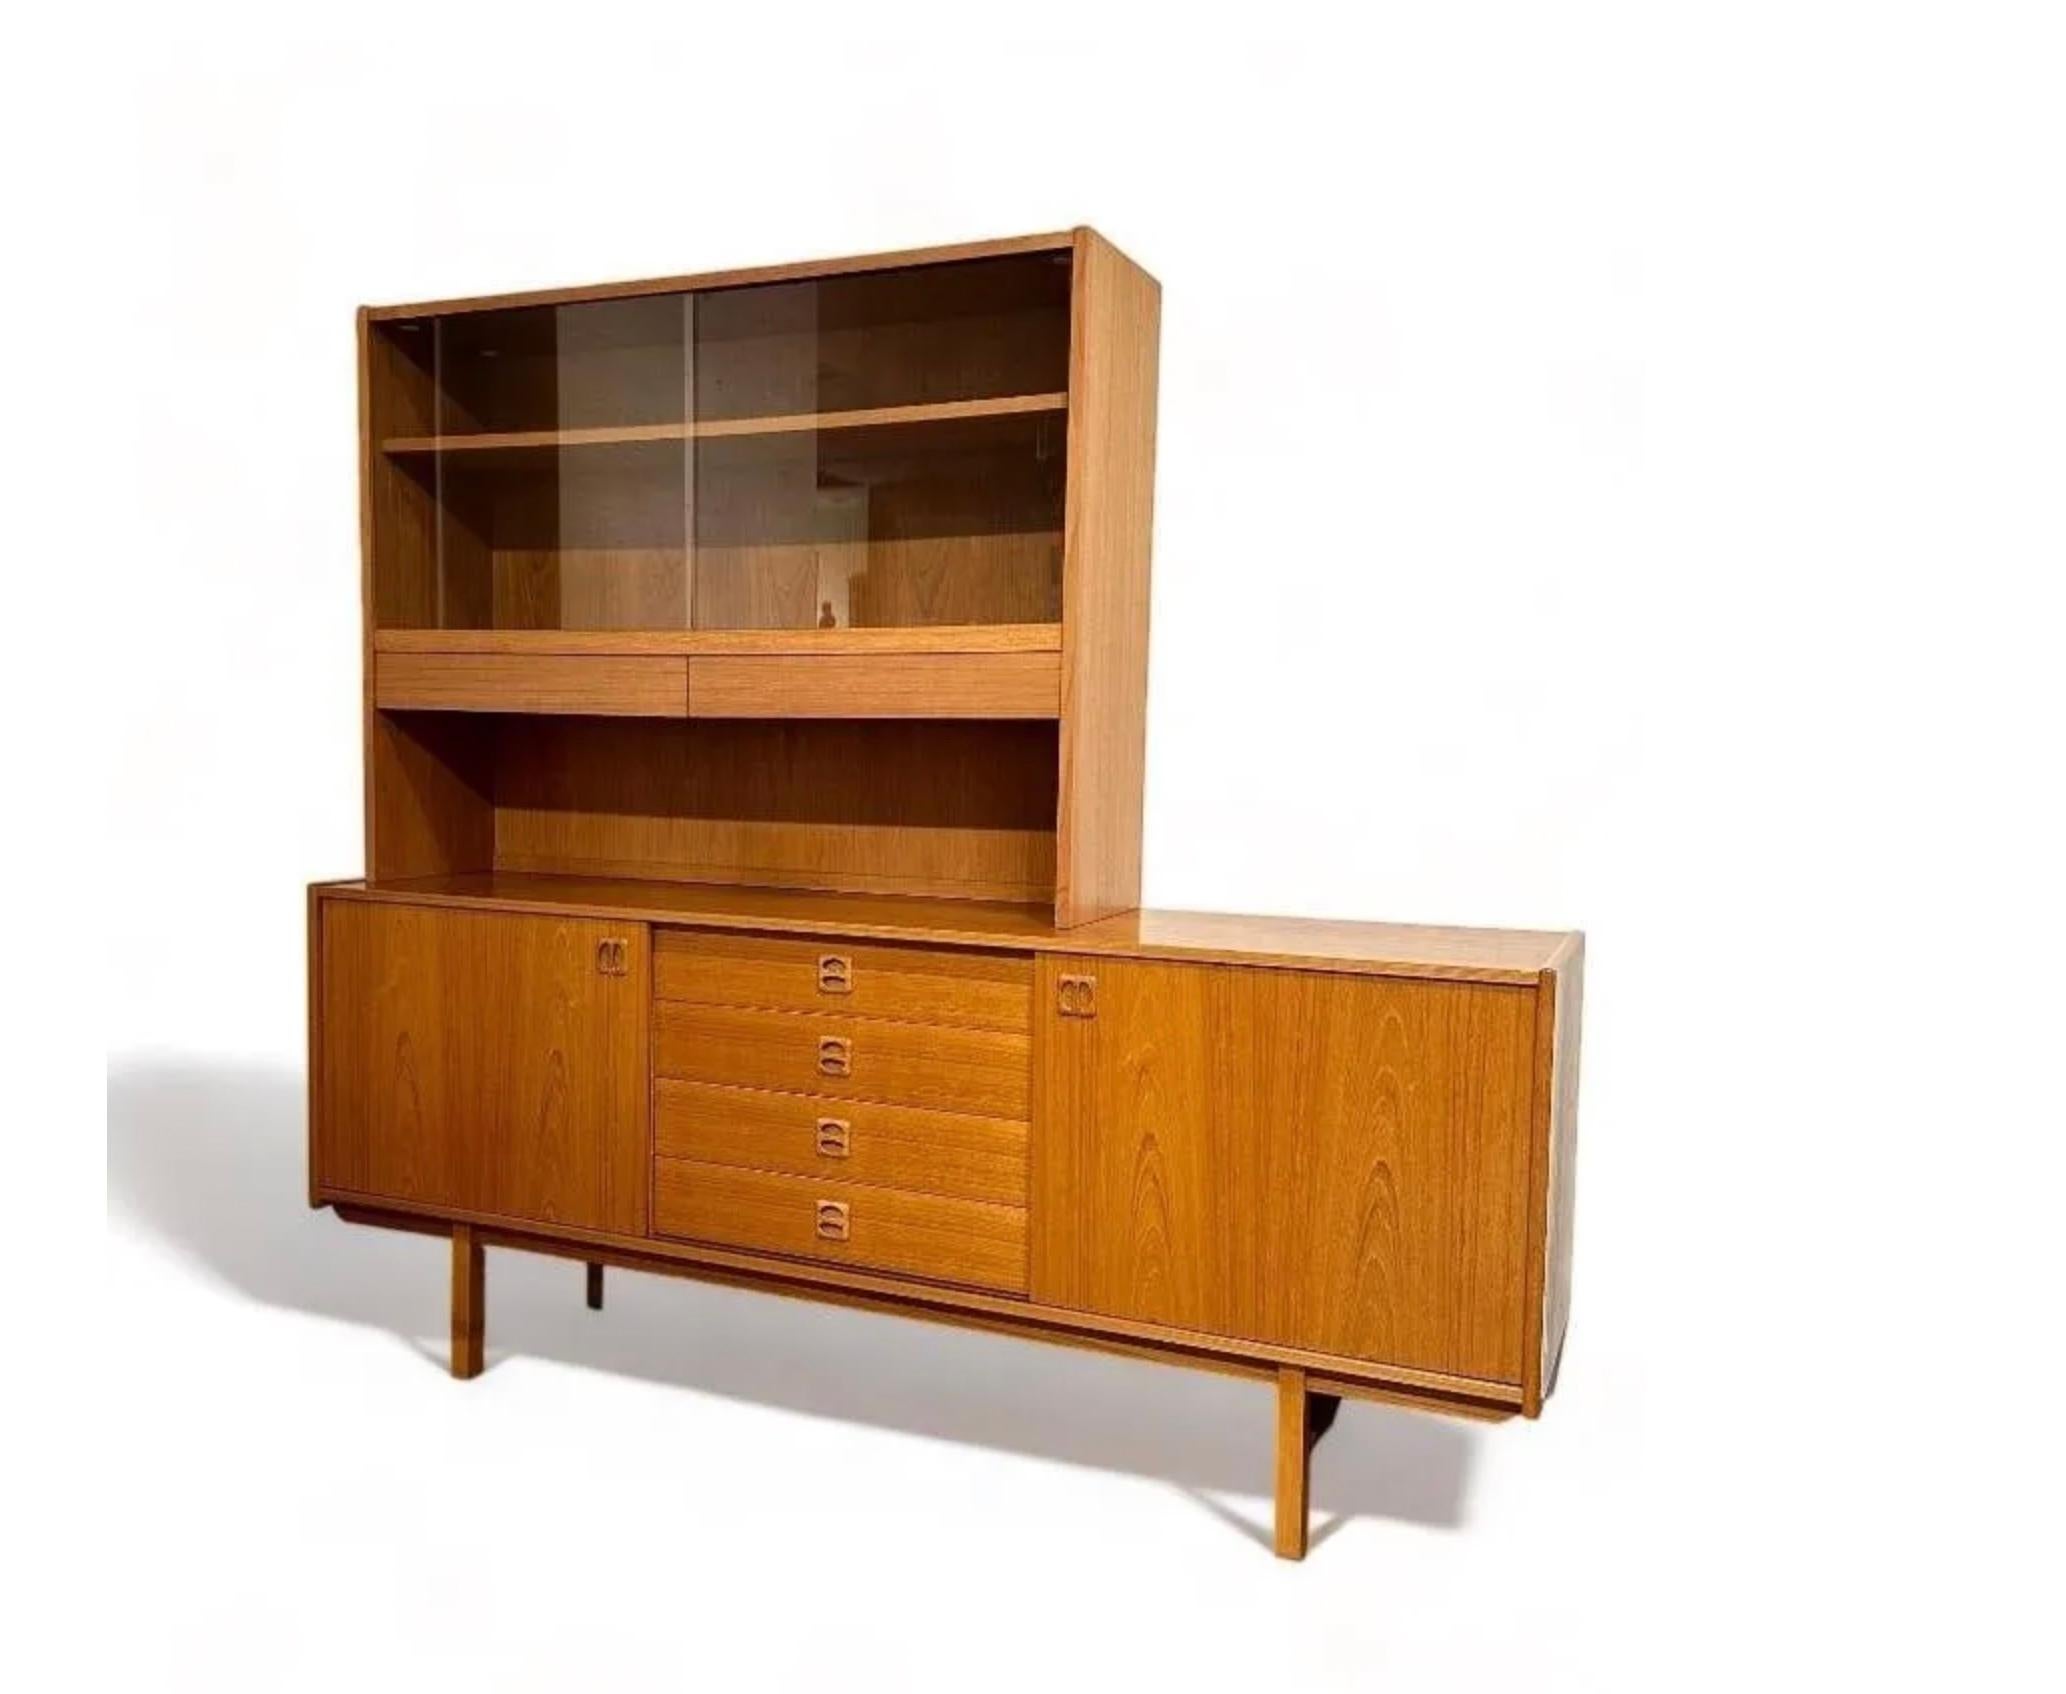 Mid Century Modern Swedish Teak Credenza with 4 drawers and top cabinet unit by Erik Worts. Has a rectangular base with a pair of sliding doors opening to shelves centering four drawers. The credenza is topped by a freestanding Cabinet with two